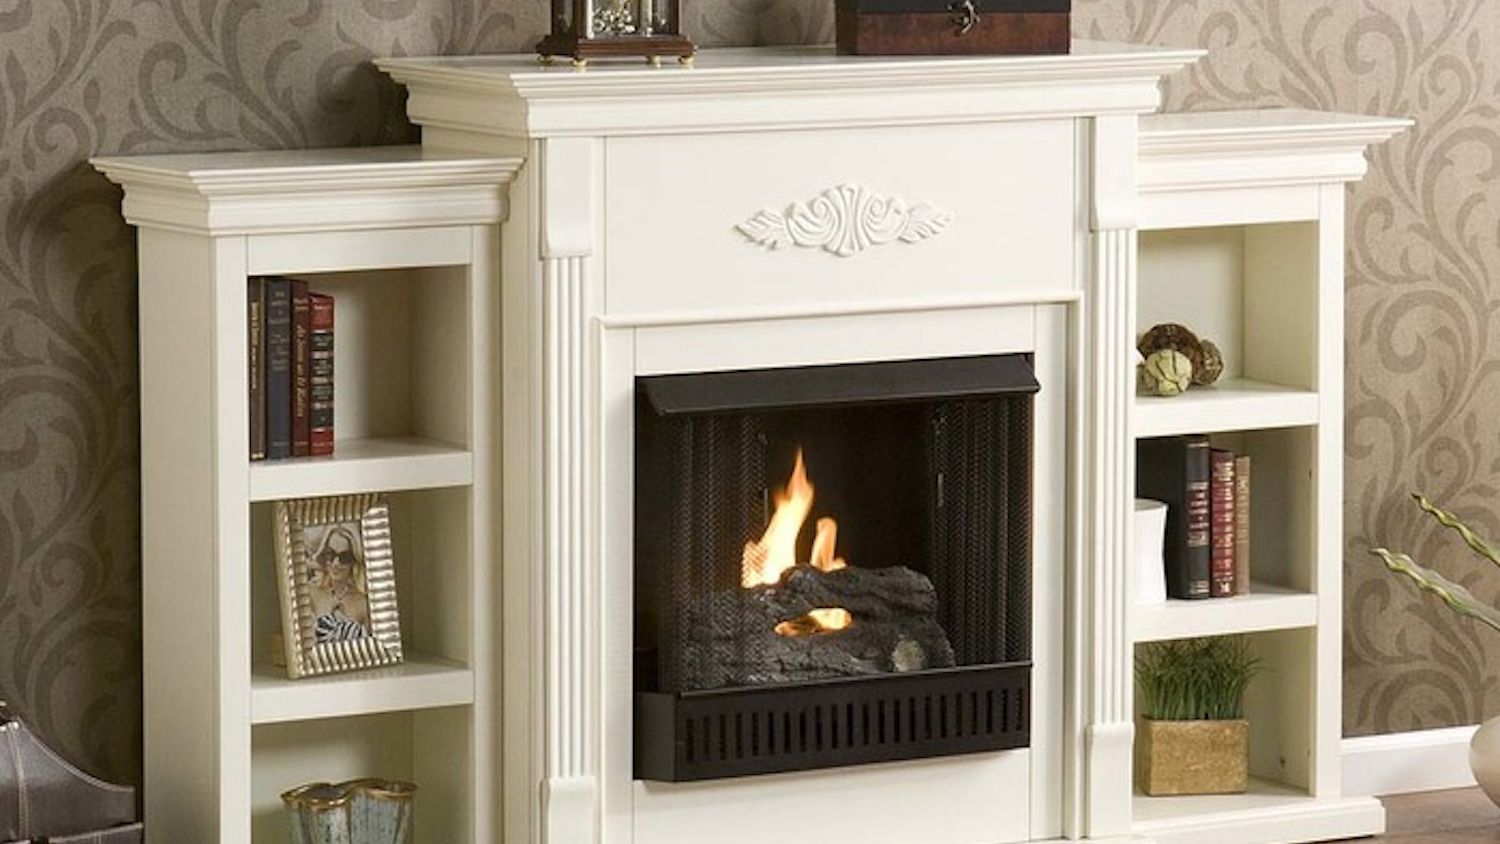 Gel Fuel Fireplace Insert Best Of How to Use Gel Fuel Fireplaces Indoors or Outdoors